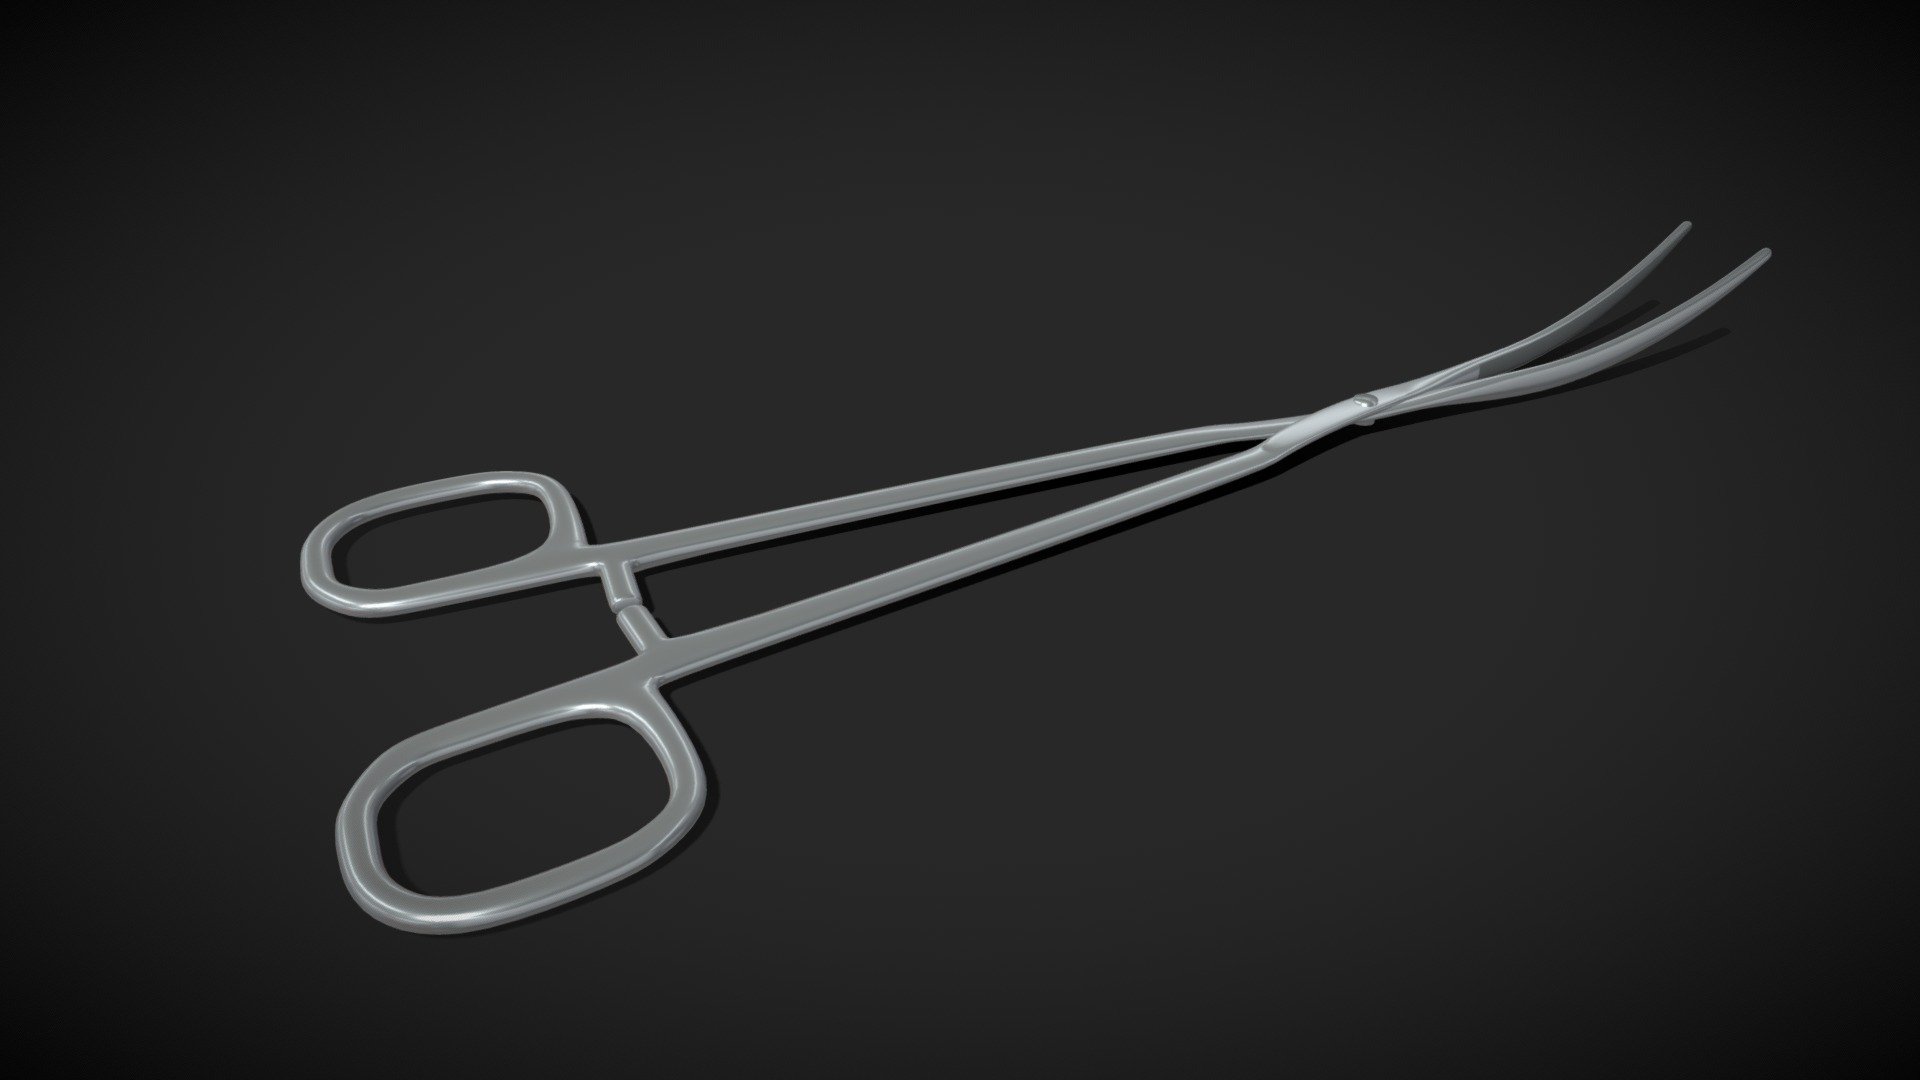 This disscetion clamp is used for many surgerys. You could use it in your next video 3d model